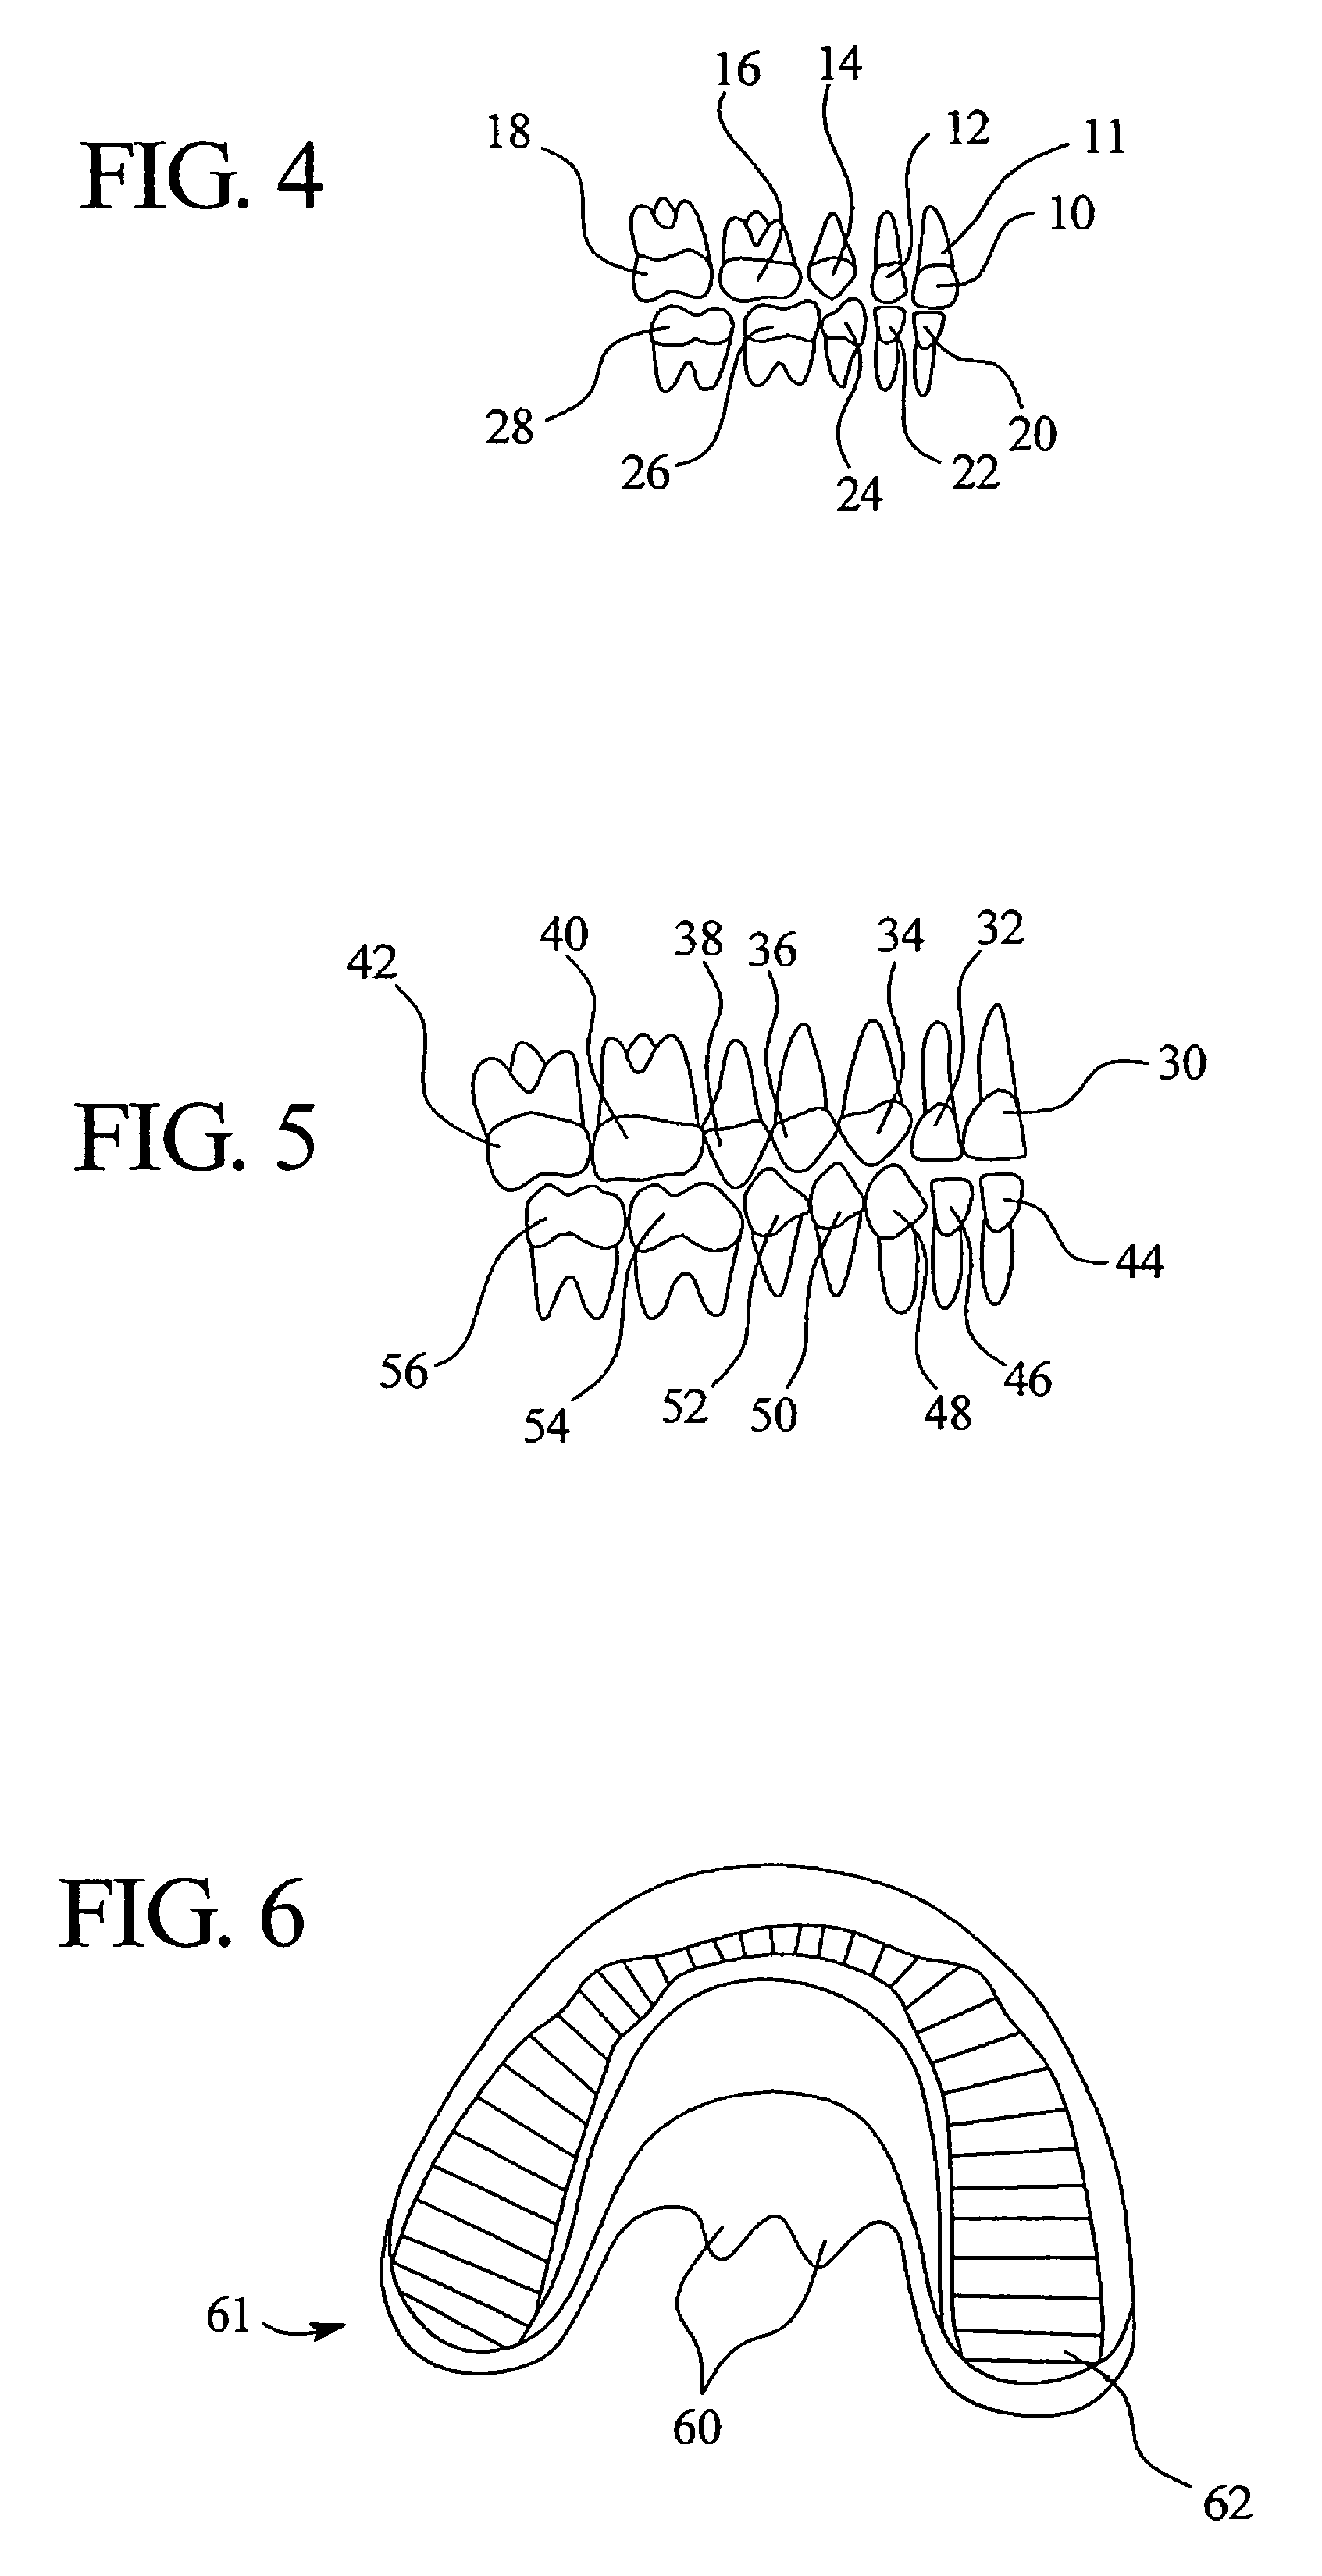 System of dental appliances having various sizes and types and a method for treating malocclusions of patients of various ages without adjustments or appointments